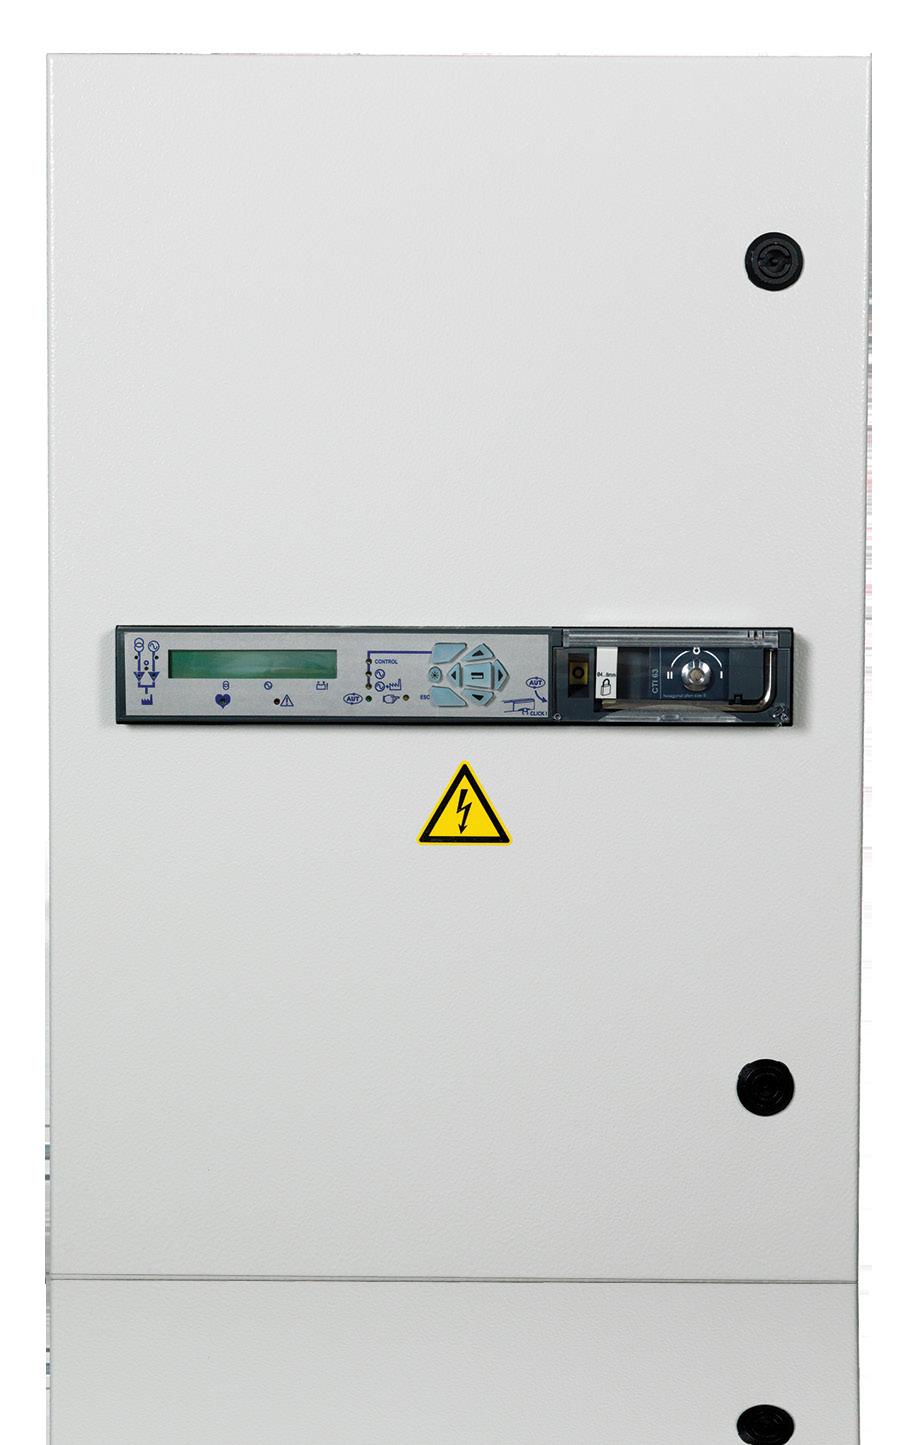 17 LOAD TRANSFER PANELS The FG Wilson range of intelligent Load Transfer Panels constantly monitor the quality of your mains electricity supply and respond immediately to any power outages.